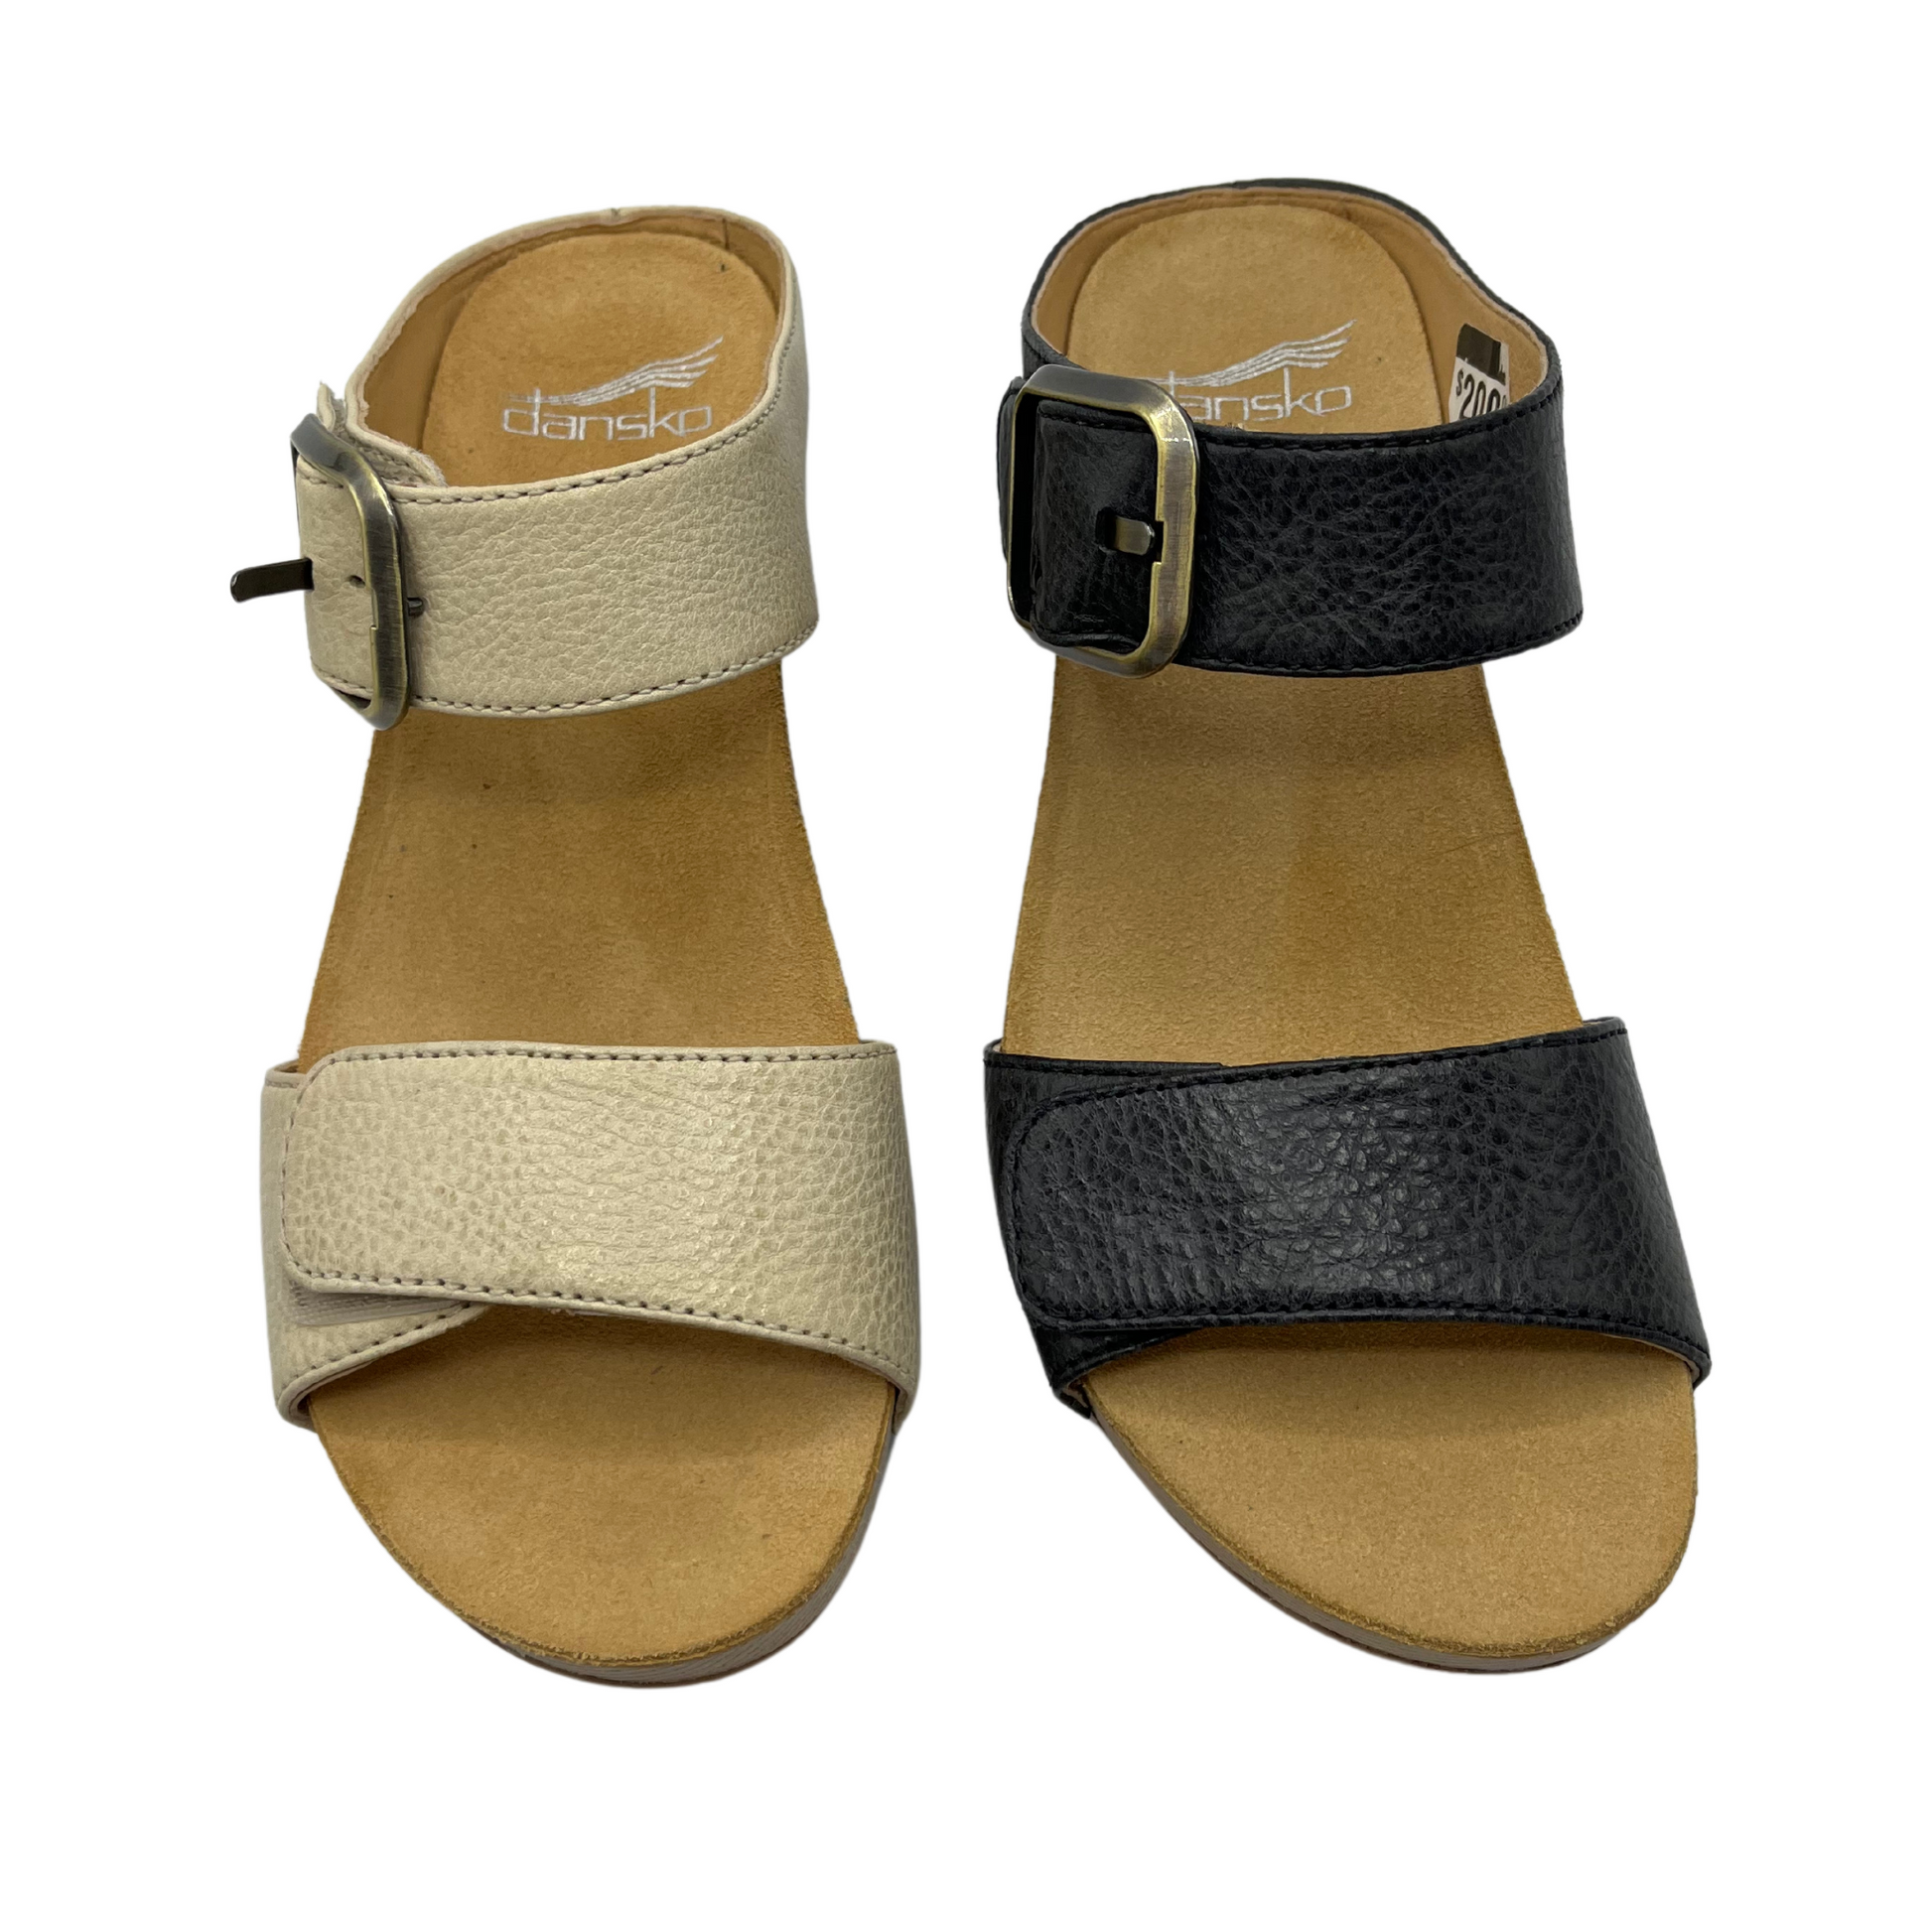 Top view of two leather strapped sandals in a slip on style. The left one is beige and the right one is black. Both have a tan lining and buckle strap.